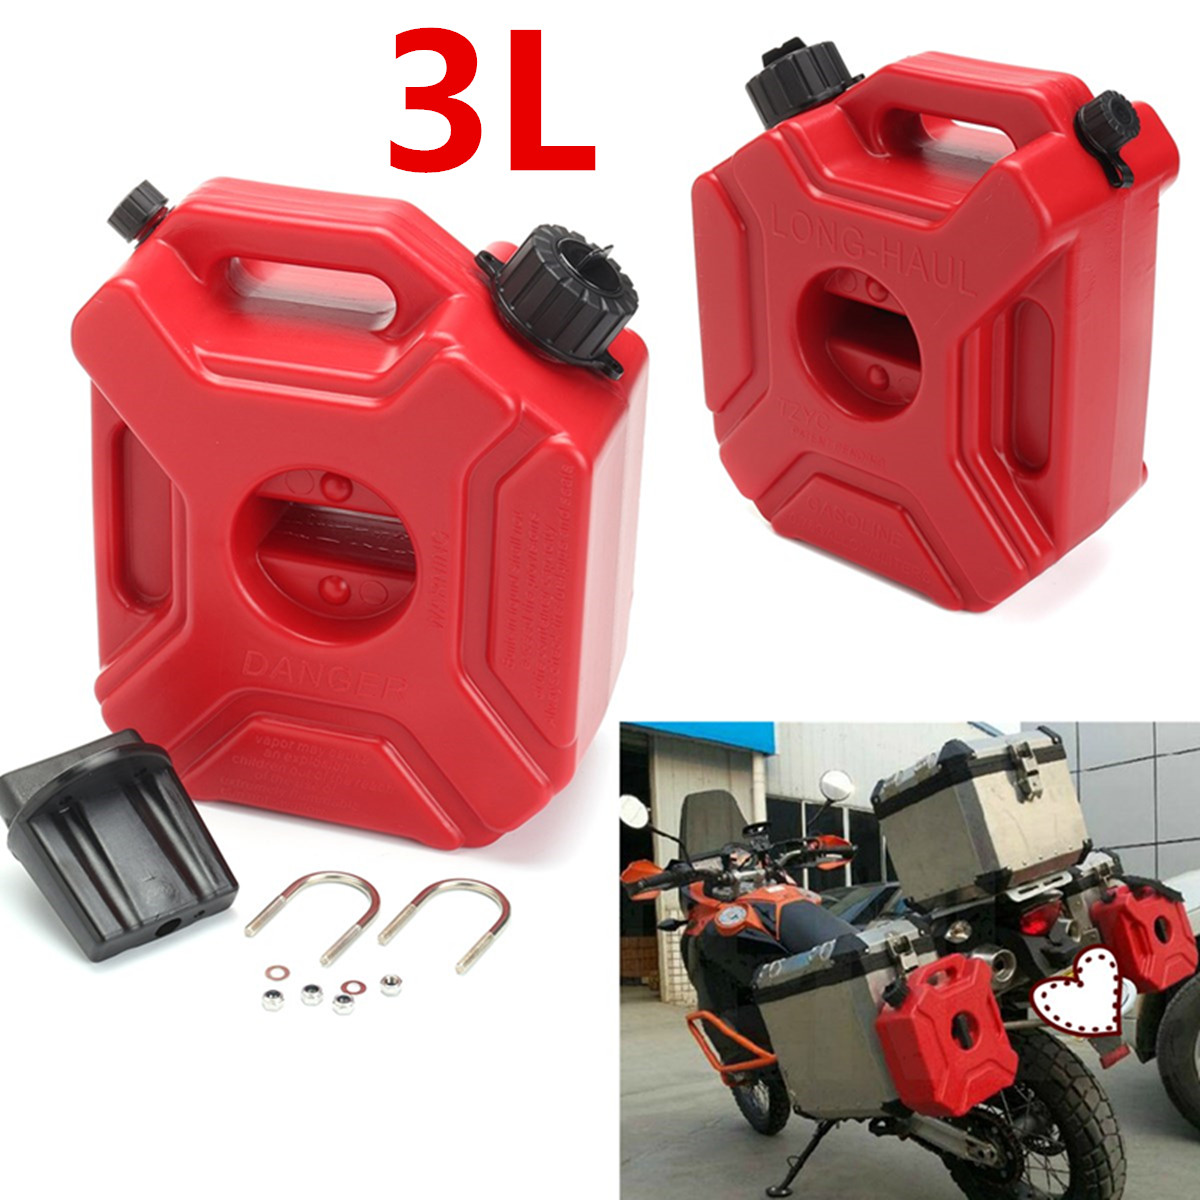 30L Litre Petrol Jerry Cans Plastic Motorcycle Gasoline Fuel Tank Mount  Lock 5 Gallon Gas Can Petrol Jerrycan Jerrican Container - AliExpress